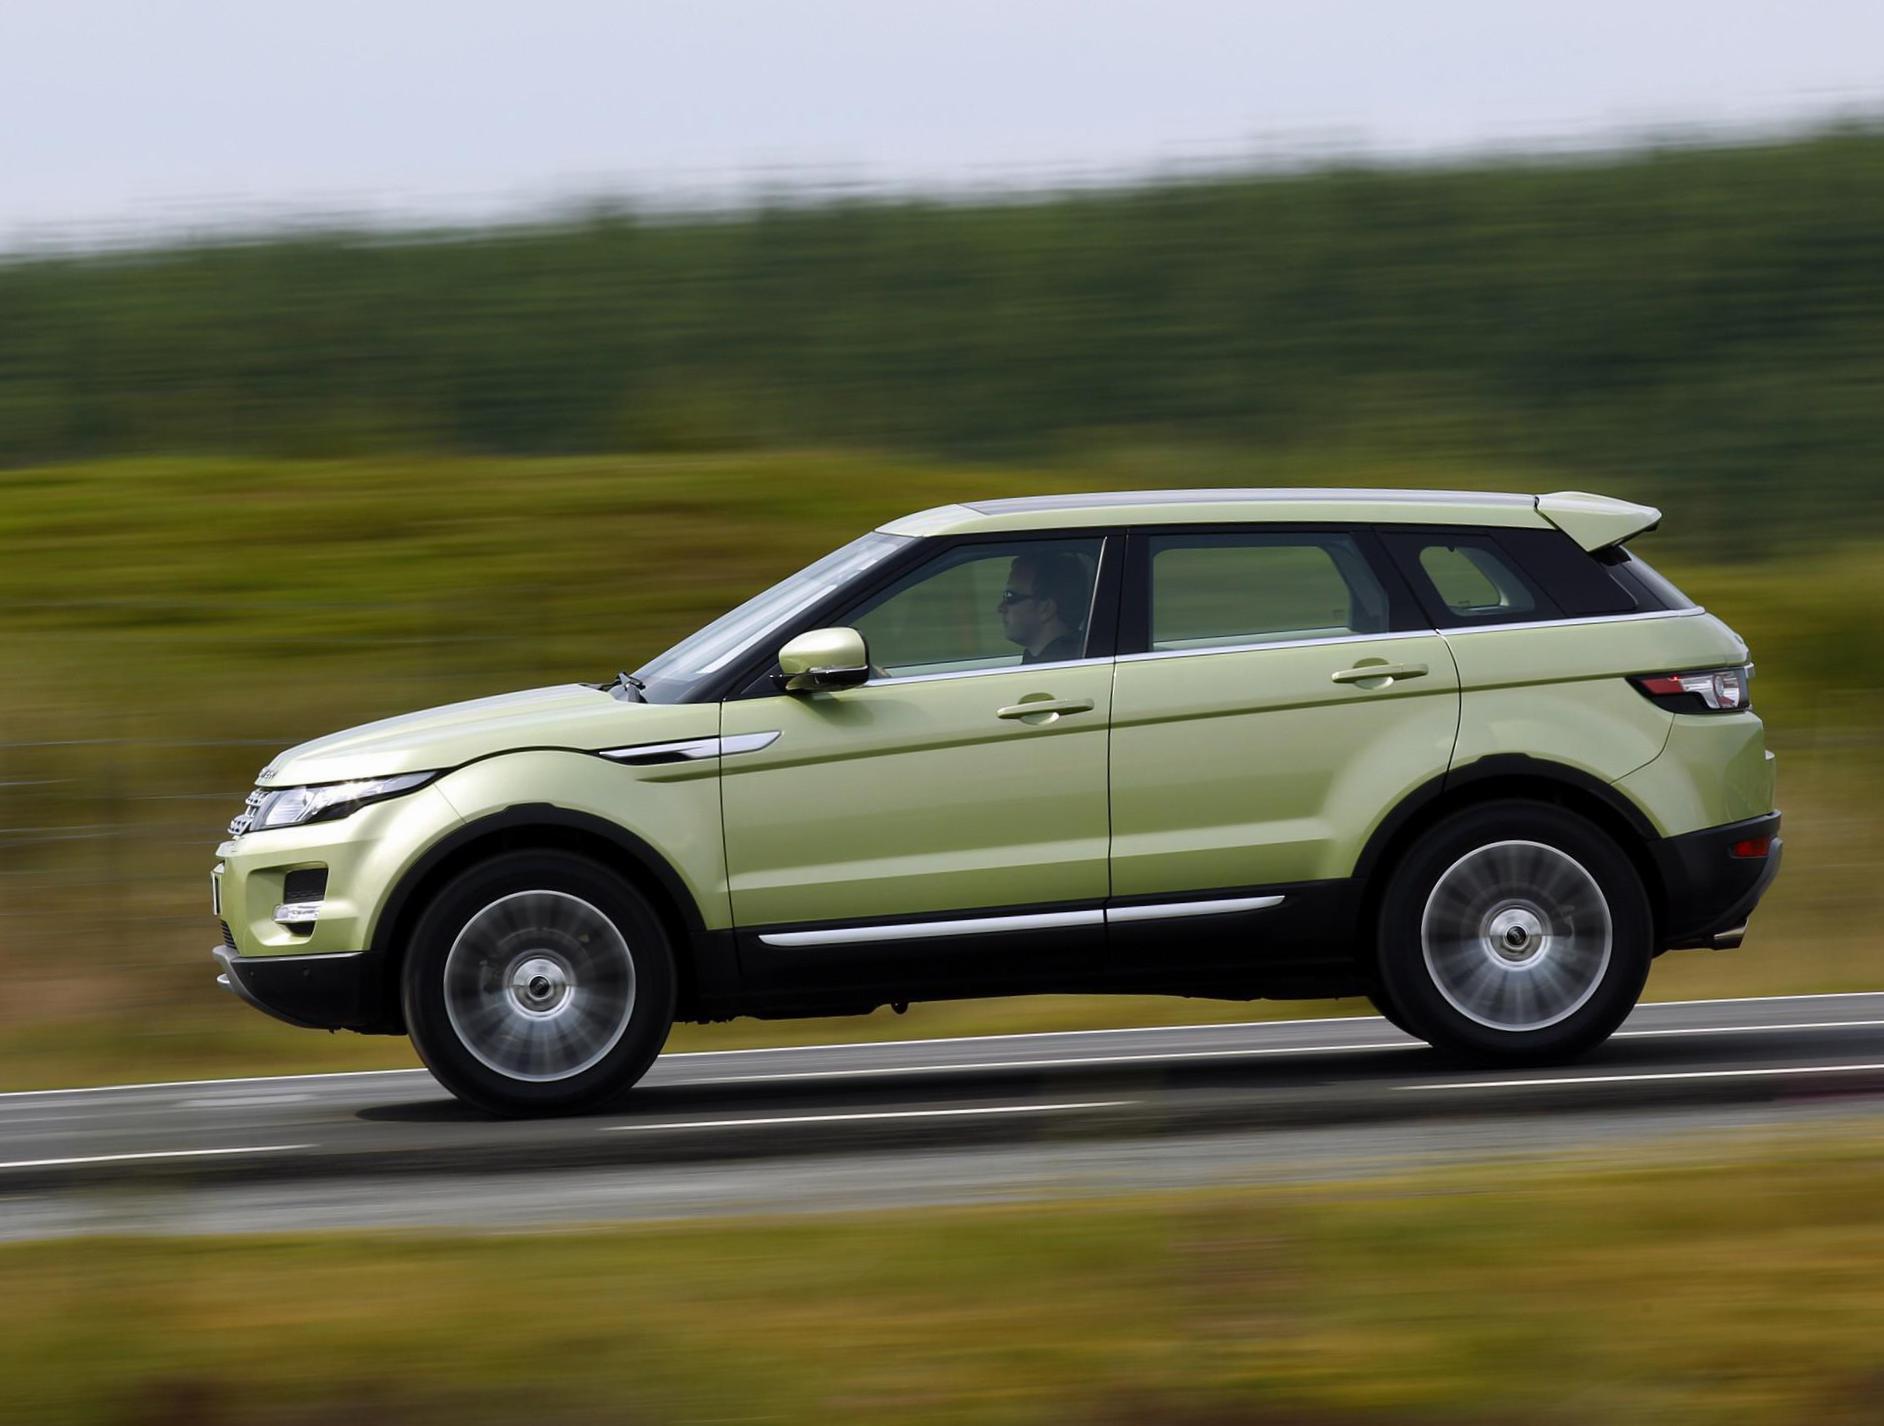 Range Rover Evoque Land Rover approved 2011